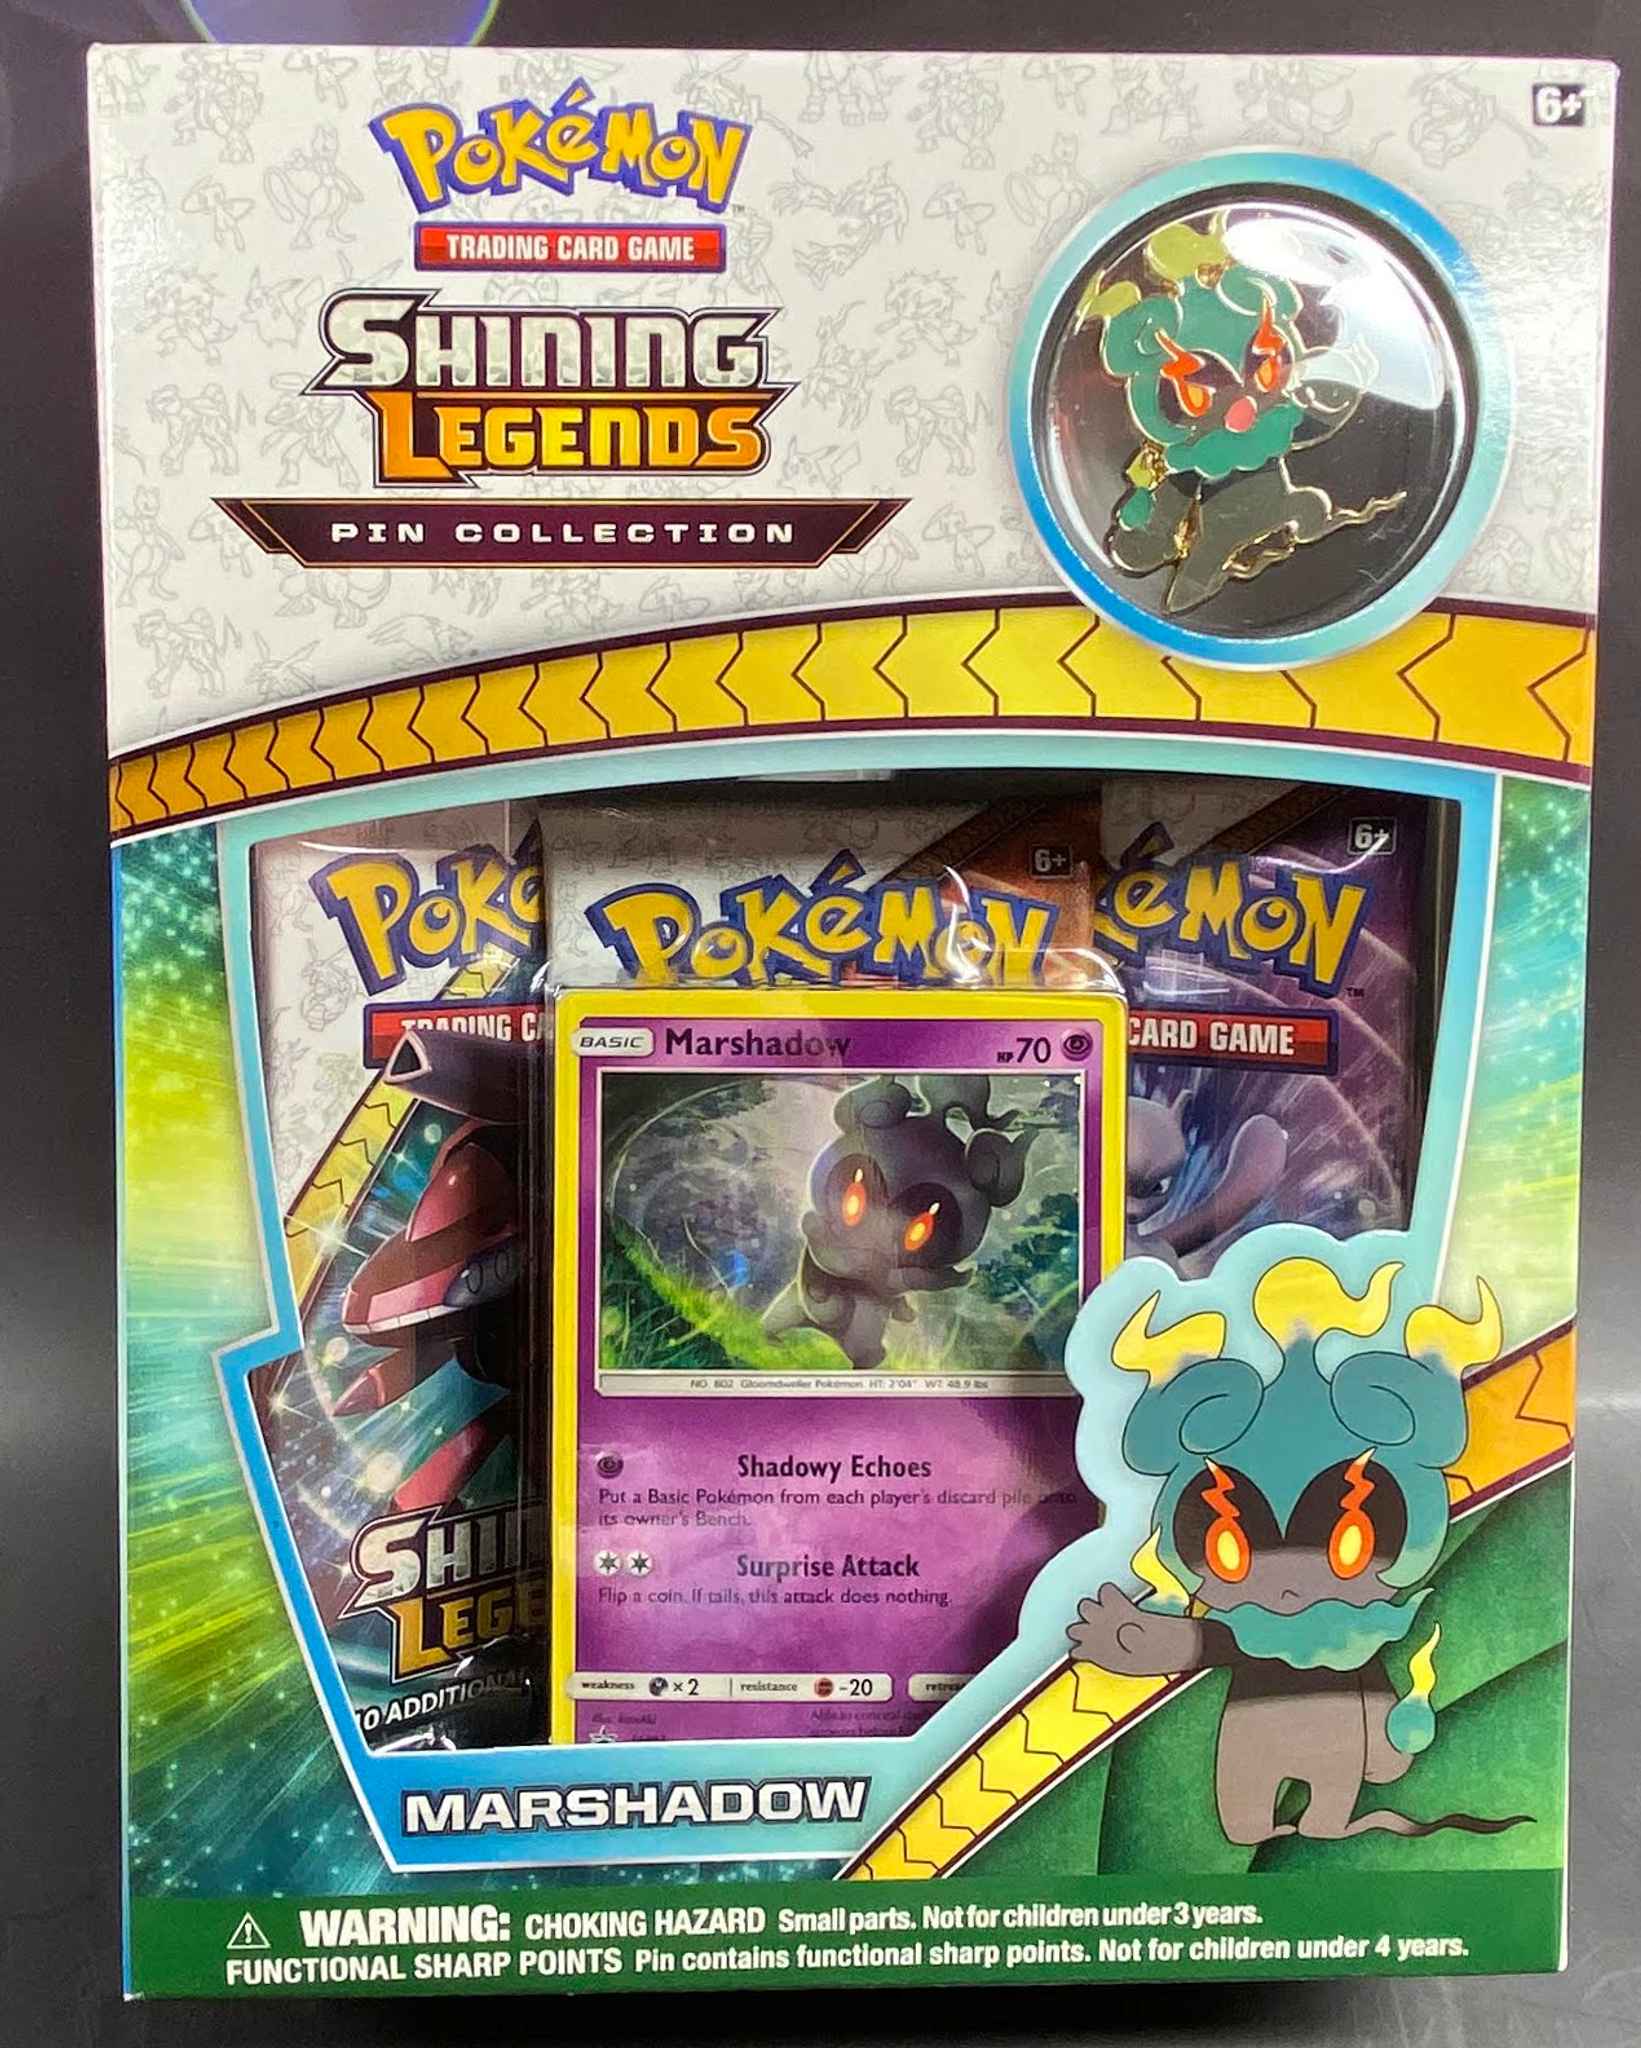 Marshadow Shining Legends Pin Collection Box Pokemon TCG FACTORY SEALED 